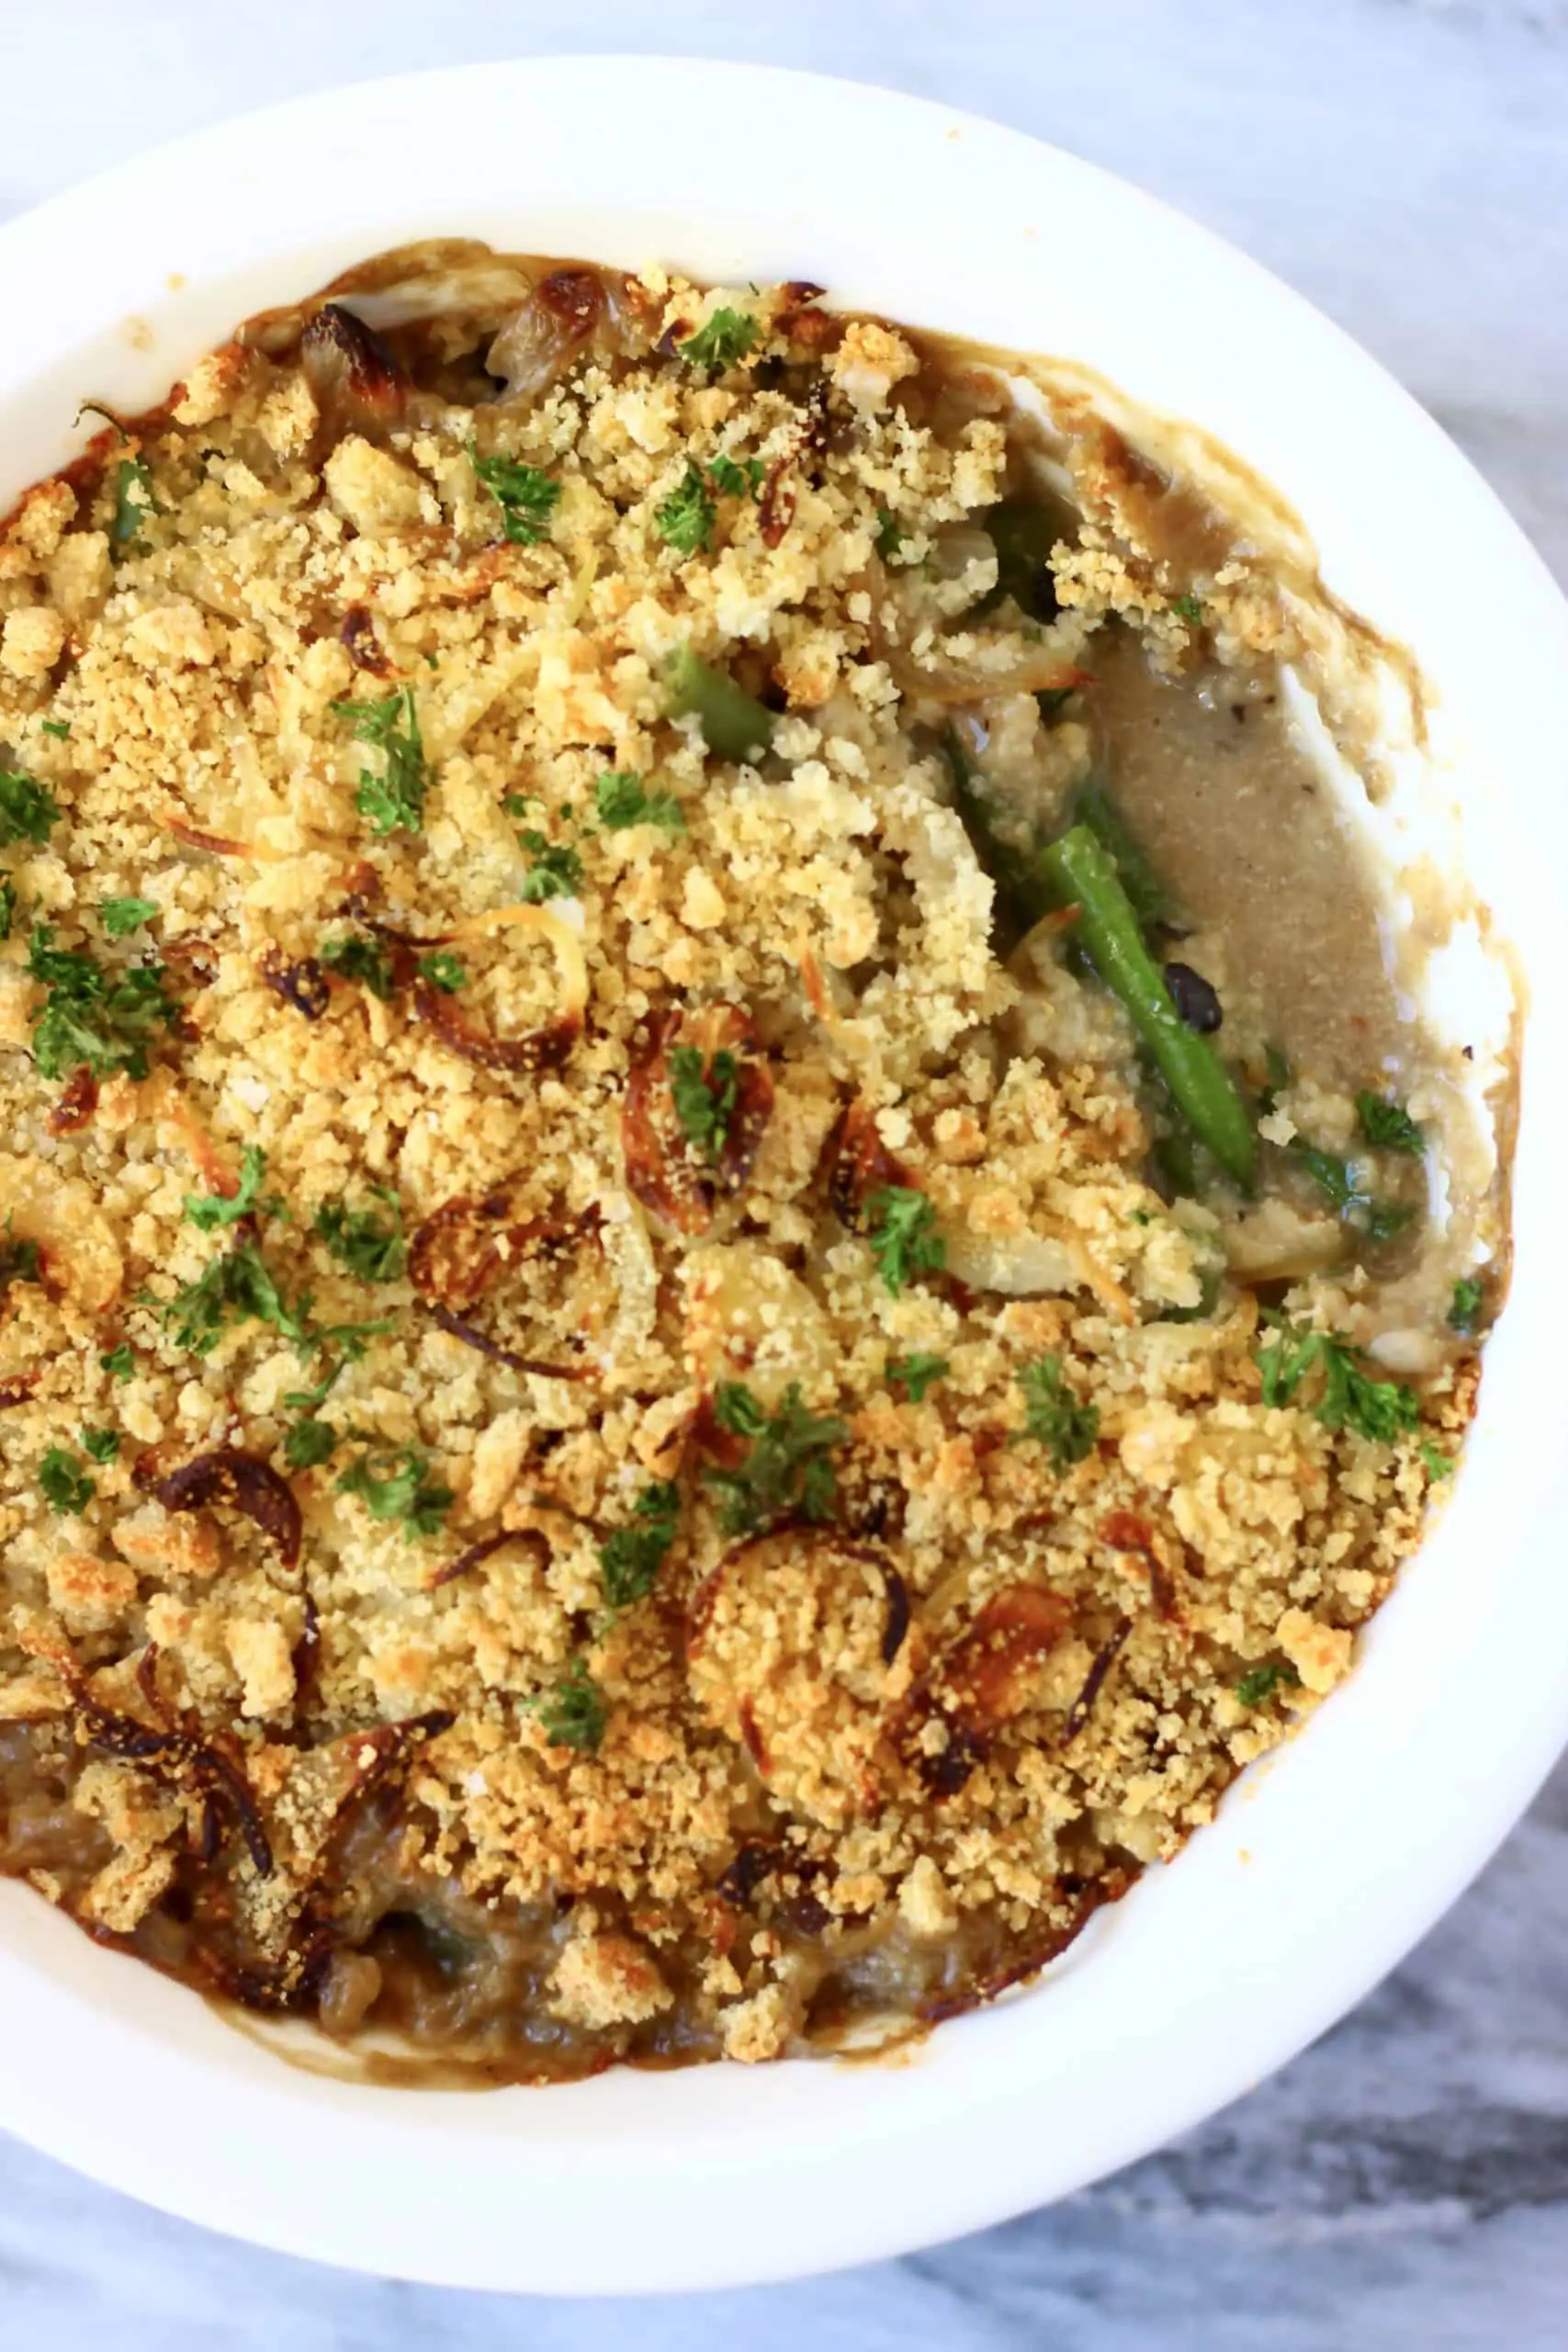 Green bean casserole topped with breadcrumbs and parsley in a white pie dish with a mouthful taken out